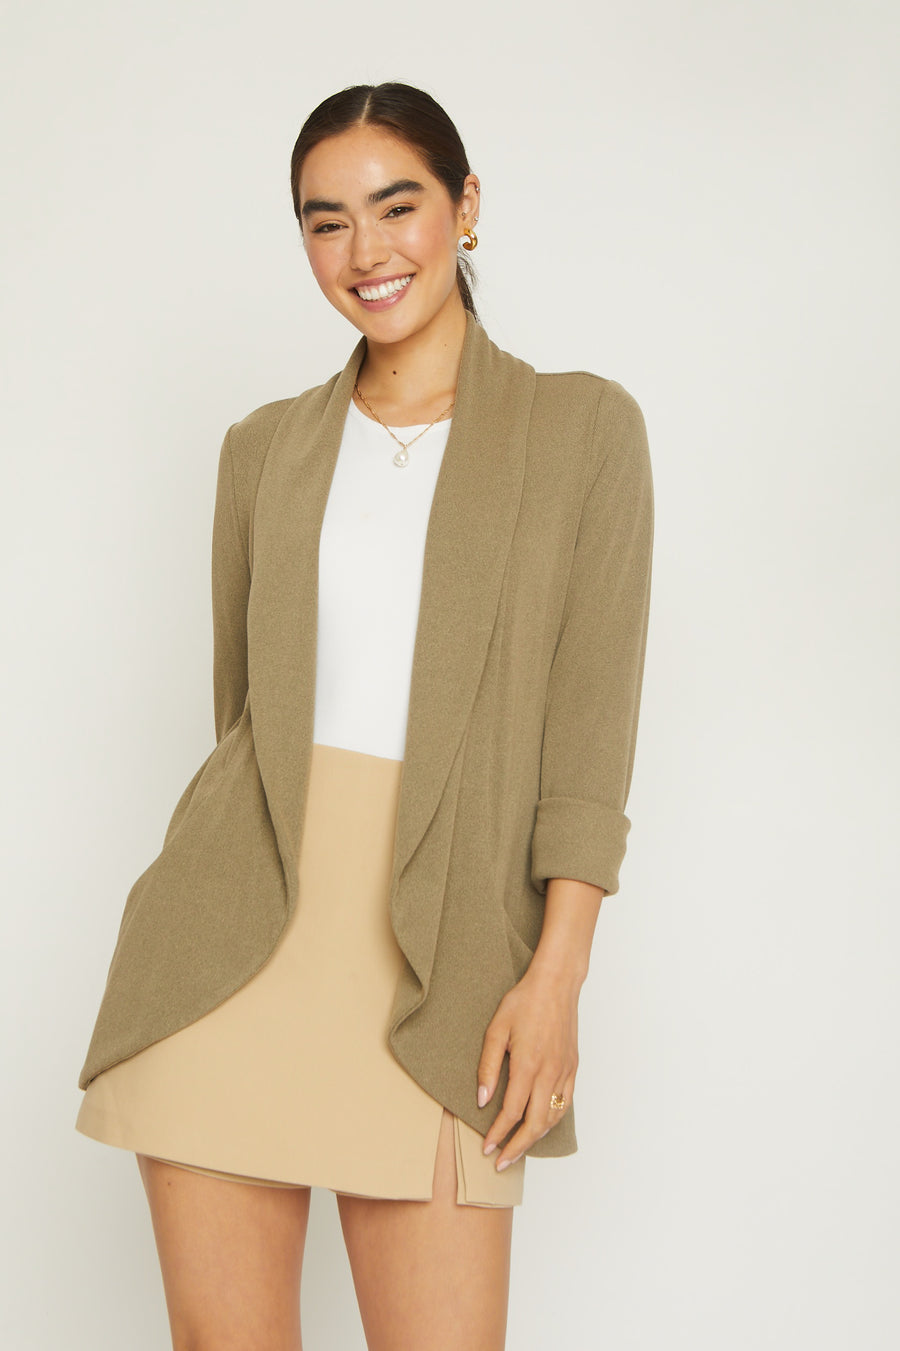 No Srcipt image - Images of 1 of 8 Classic knit jacket with shawl collar rib knit medium weight fabric side pockets heather khaki green color